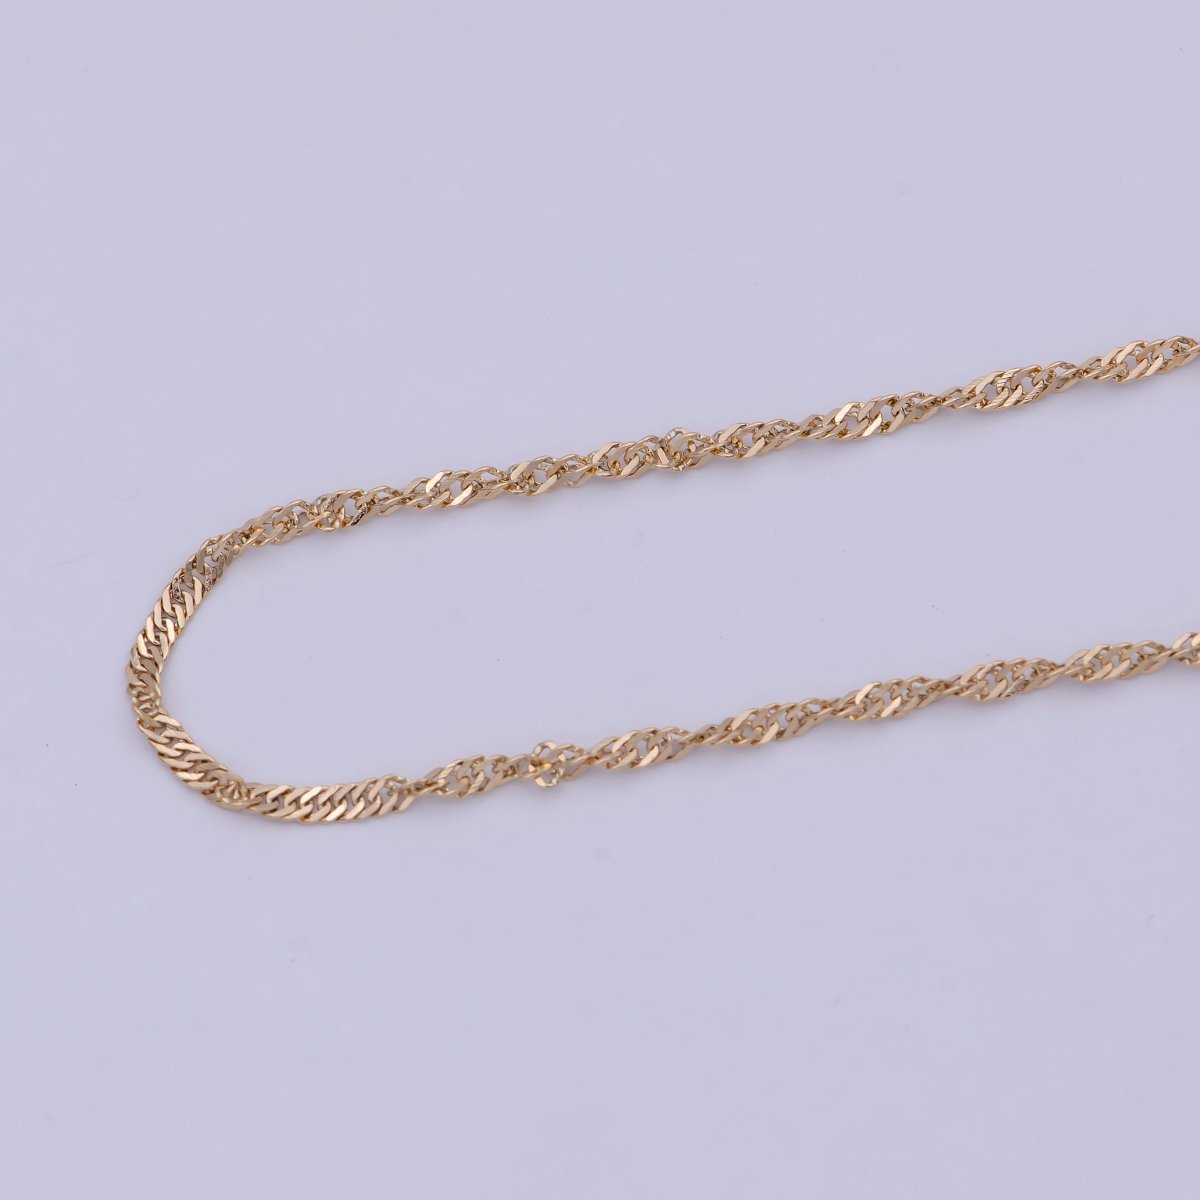 Gold Twist Singapore Chain Necklace, Unique Layer Chain Necklace Ready to Wear 20 Inch | WA-760 Clearance Pricing - DLUXCA